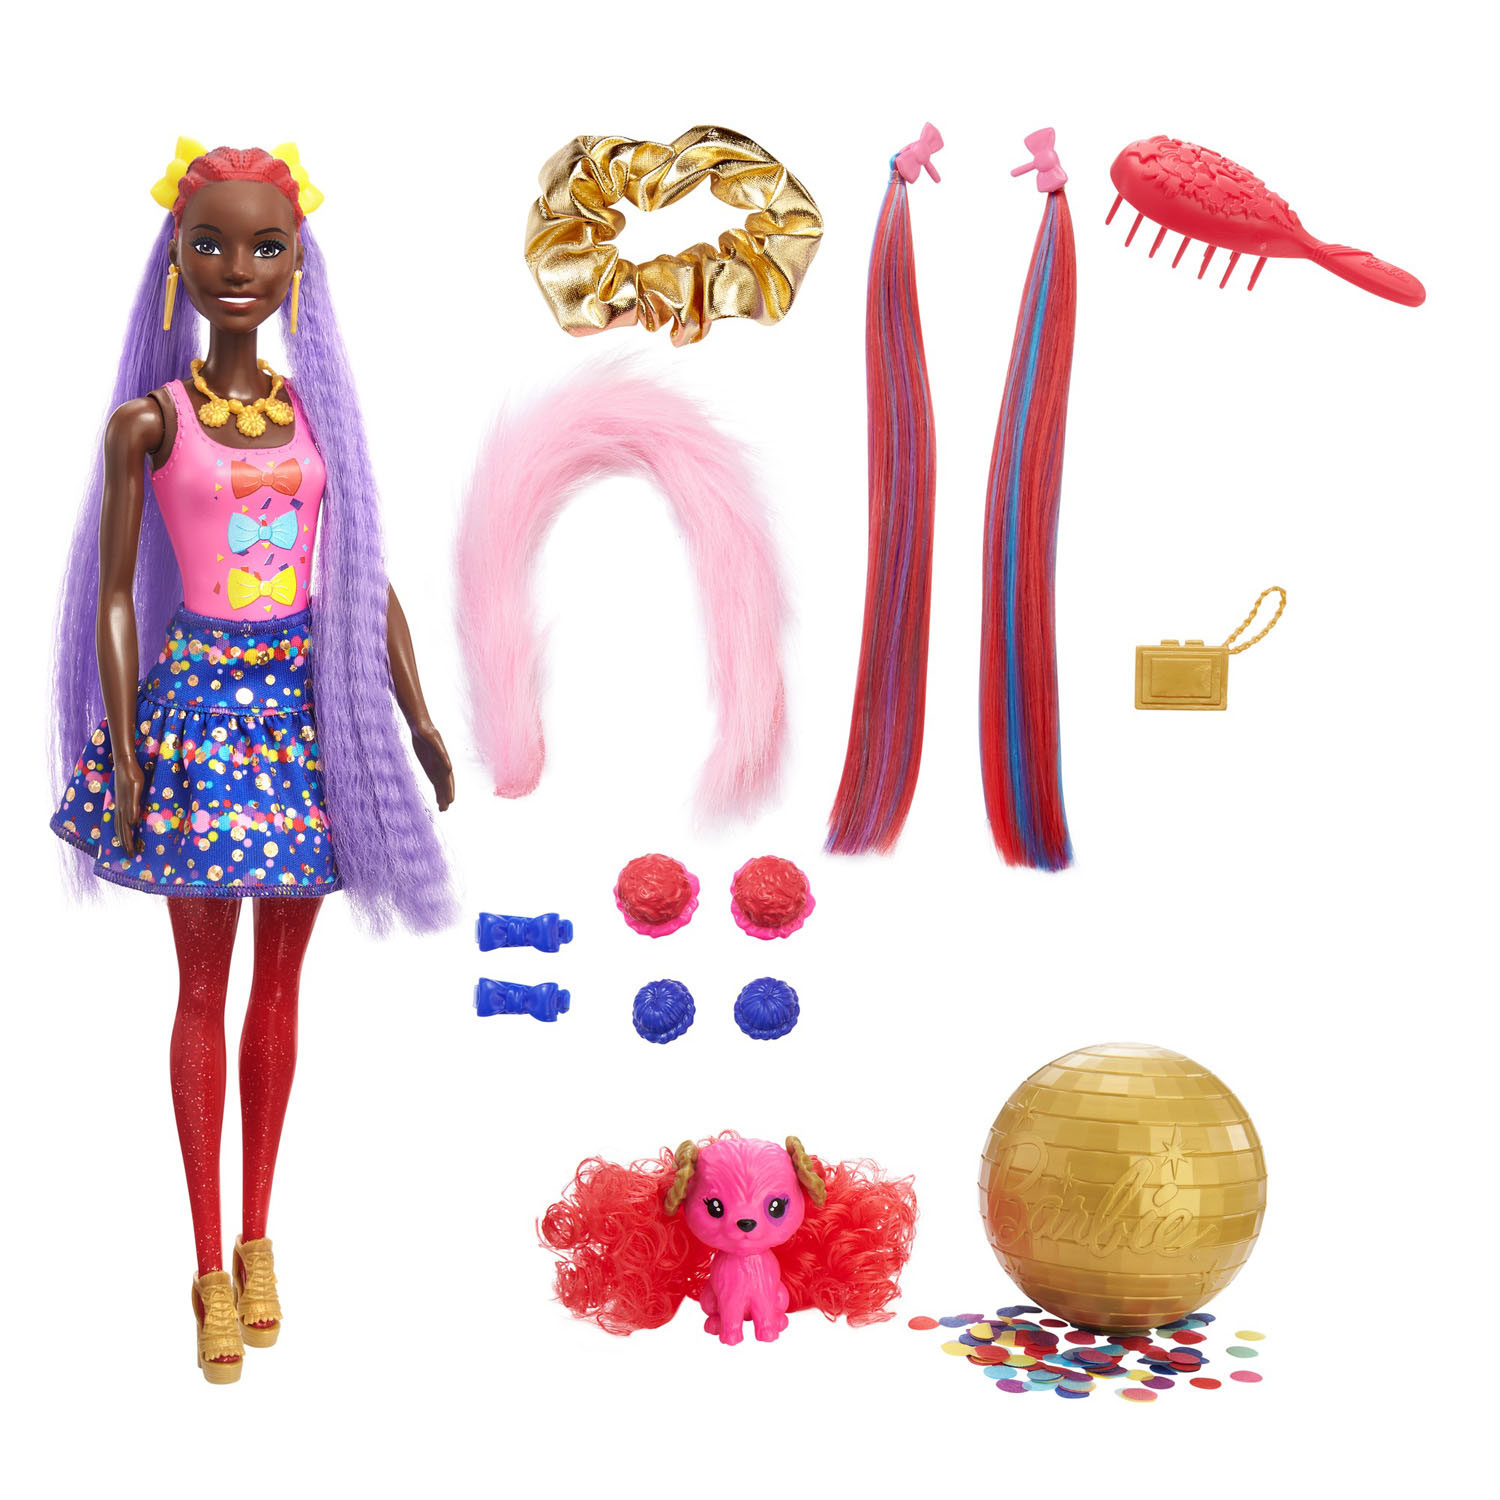  Barbie Color Reveal Doll, Glittery Purple with 25 Hairstyling &  Party-Themed Surprises Including 10 Plug-in Hair Pieces, Gift for Kids 3  Years Old & Up : Toys & Games